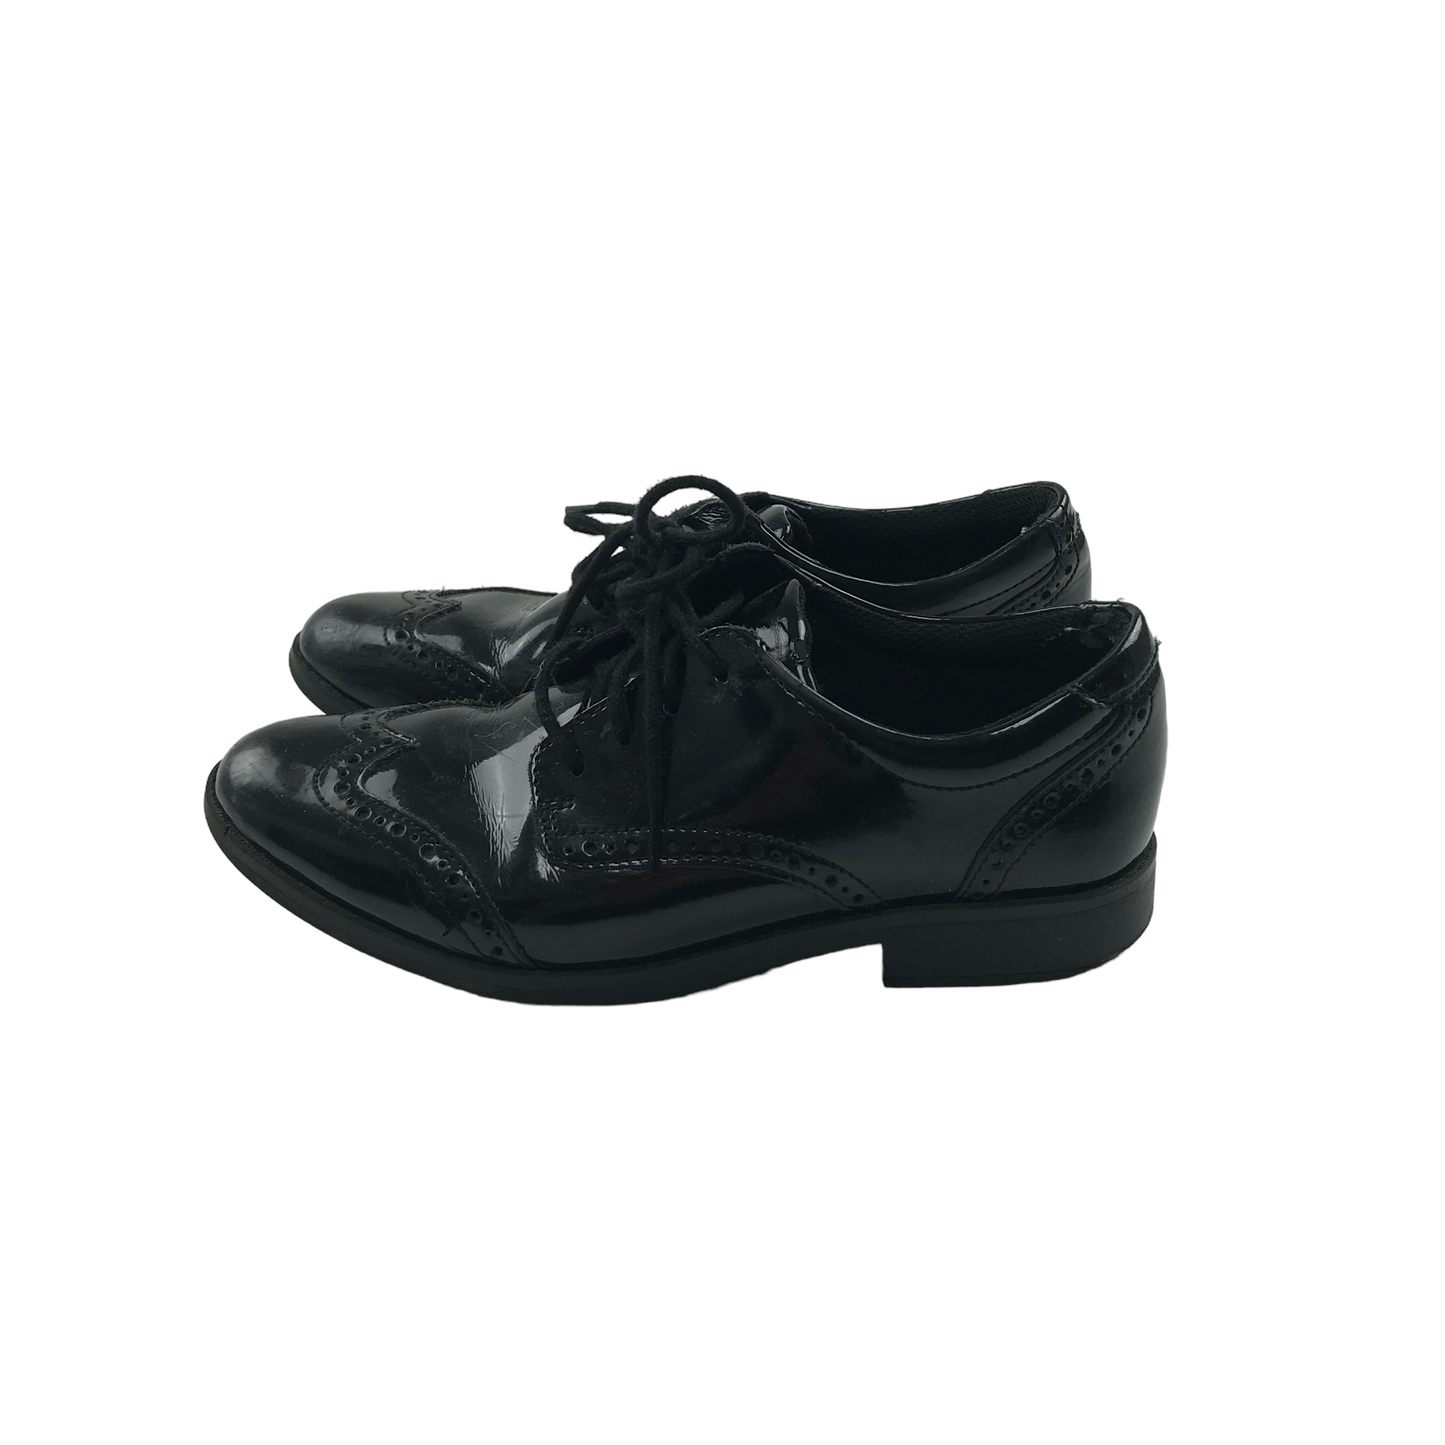 Clarks Black Glossy Brogue Shoes Shoe Size 4F